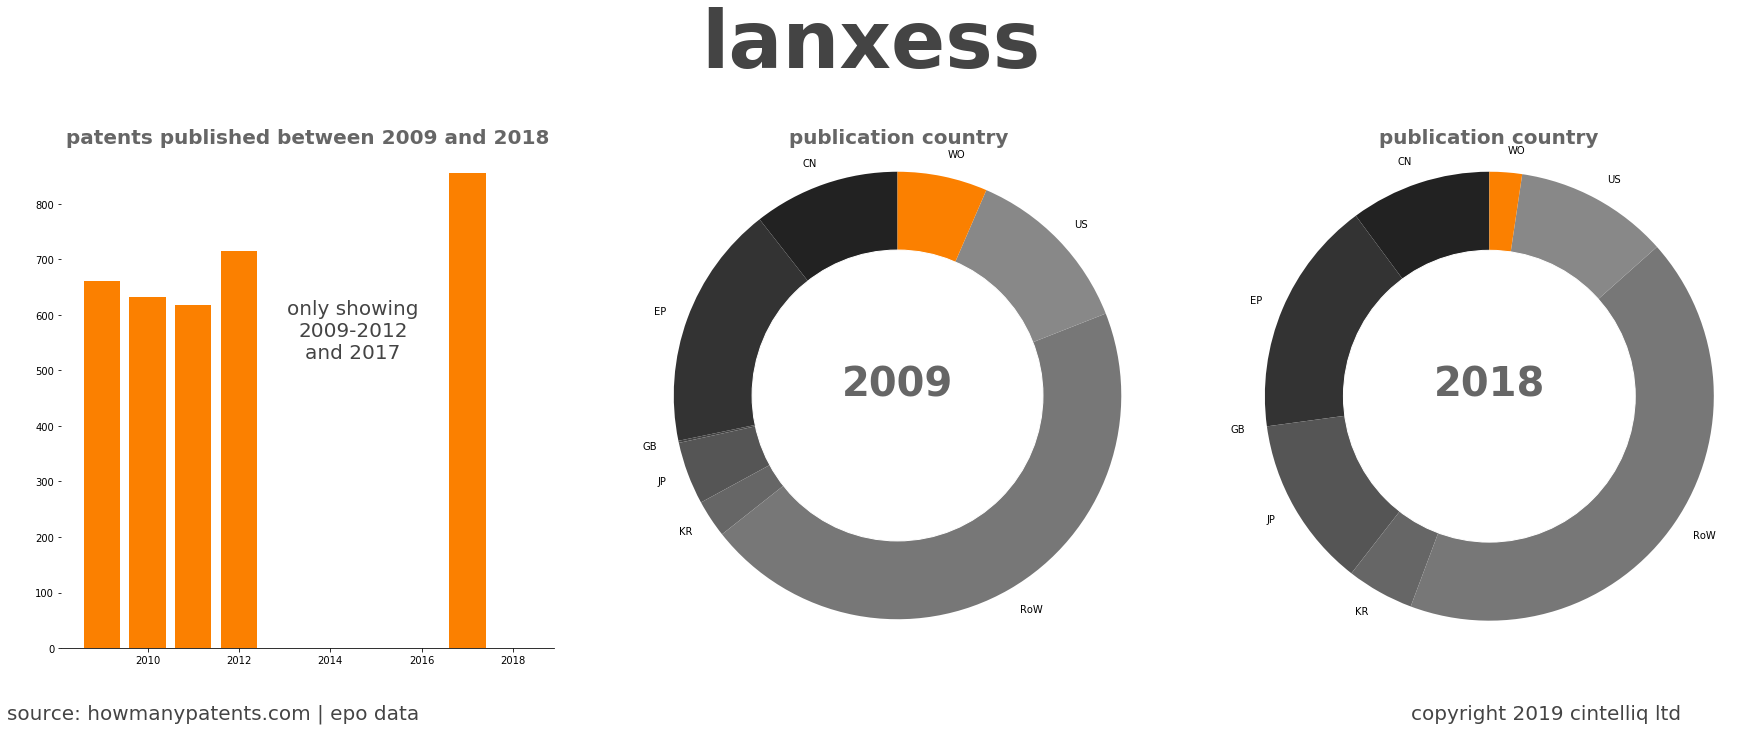 summary of patents for Lanxess